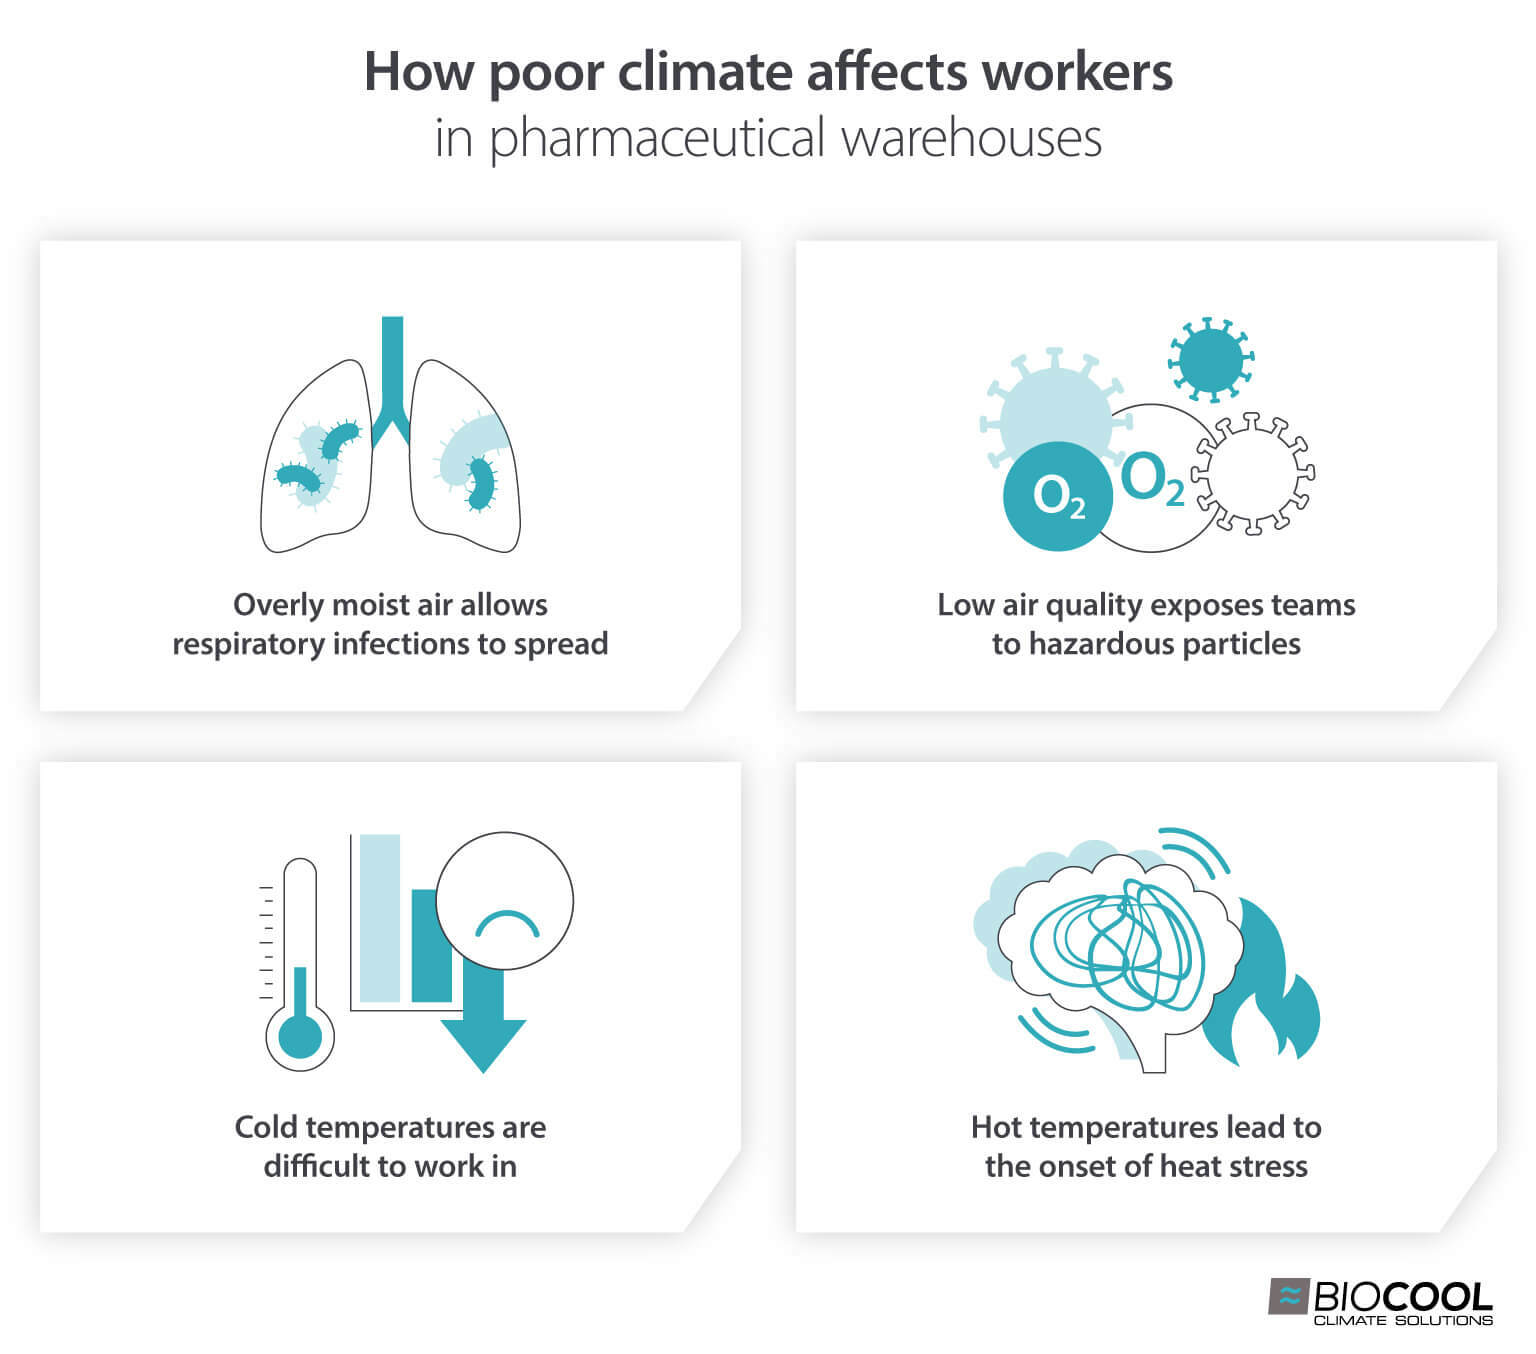 How poor climate can affect workers in pharmaceutical warehouses - infographic image